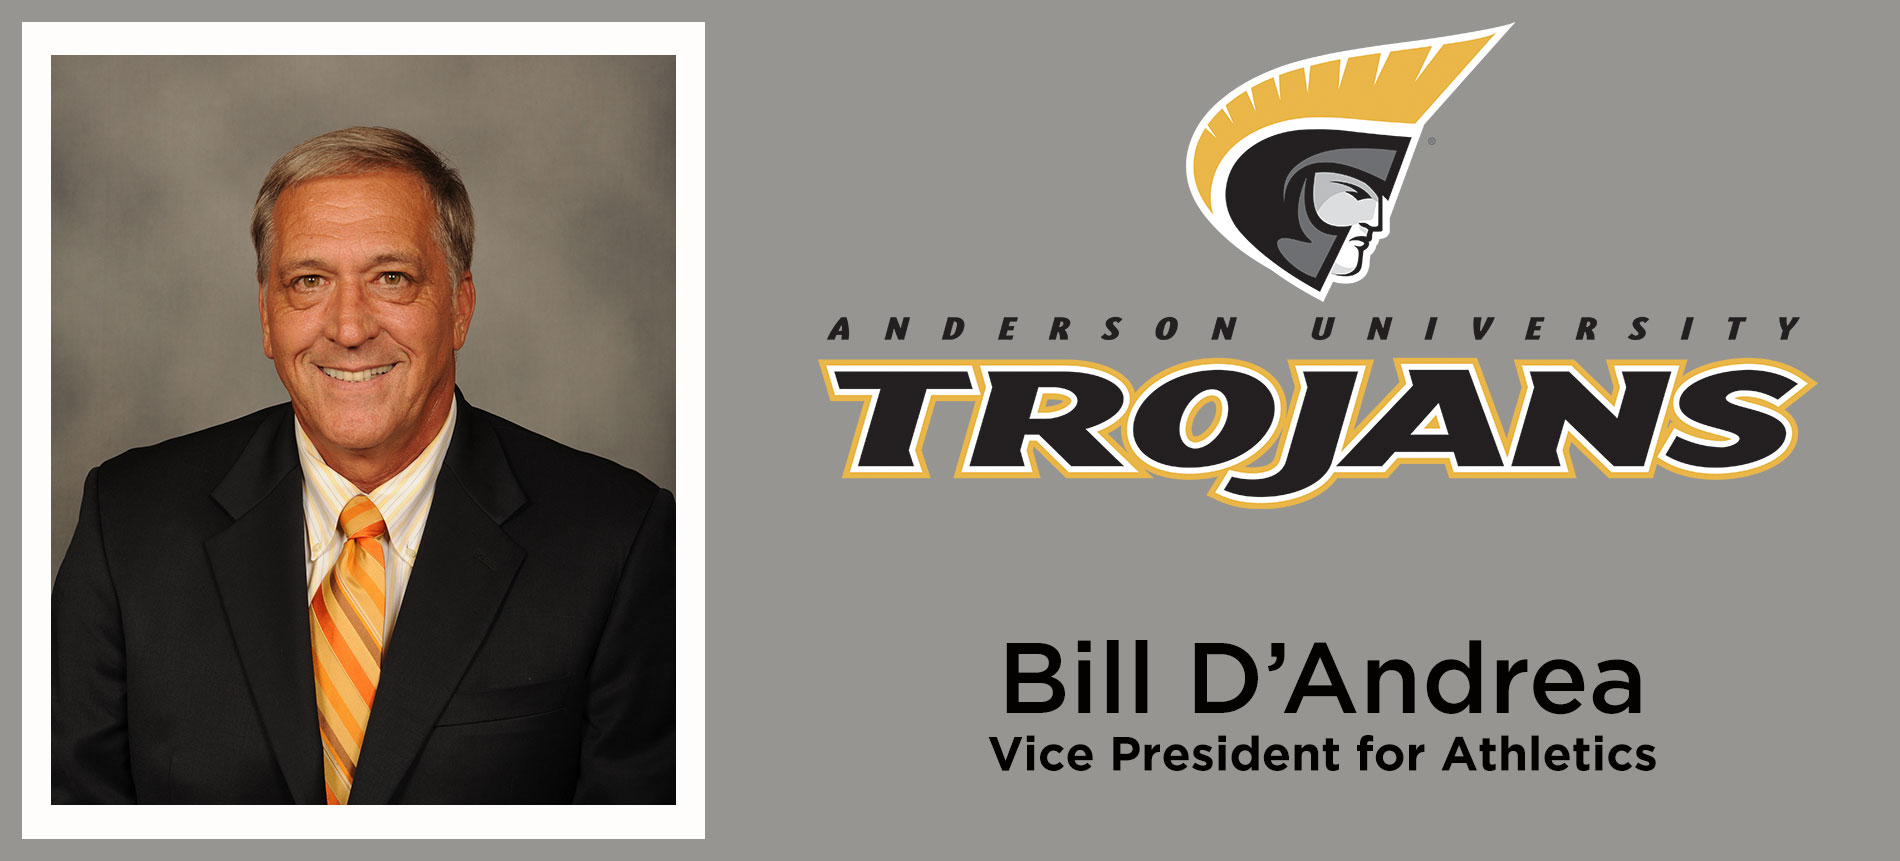 D’Andrea Named Vice President for Athletics